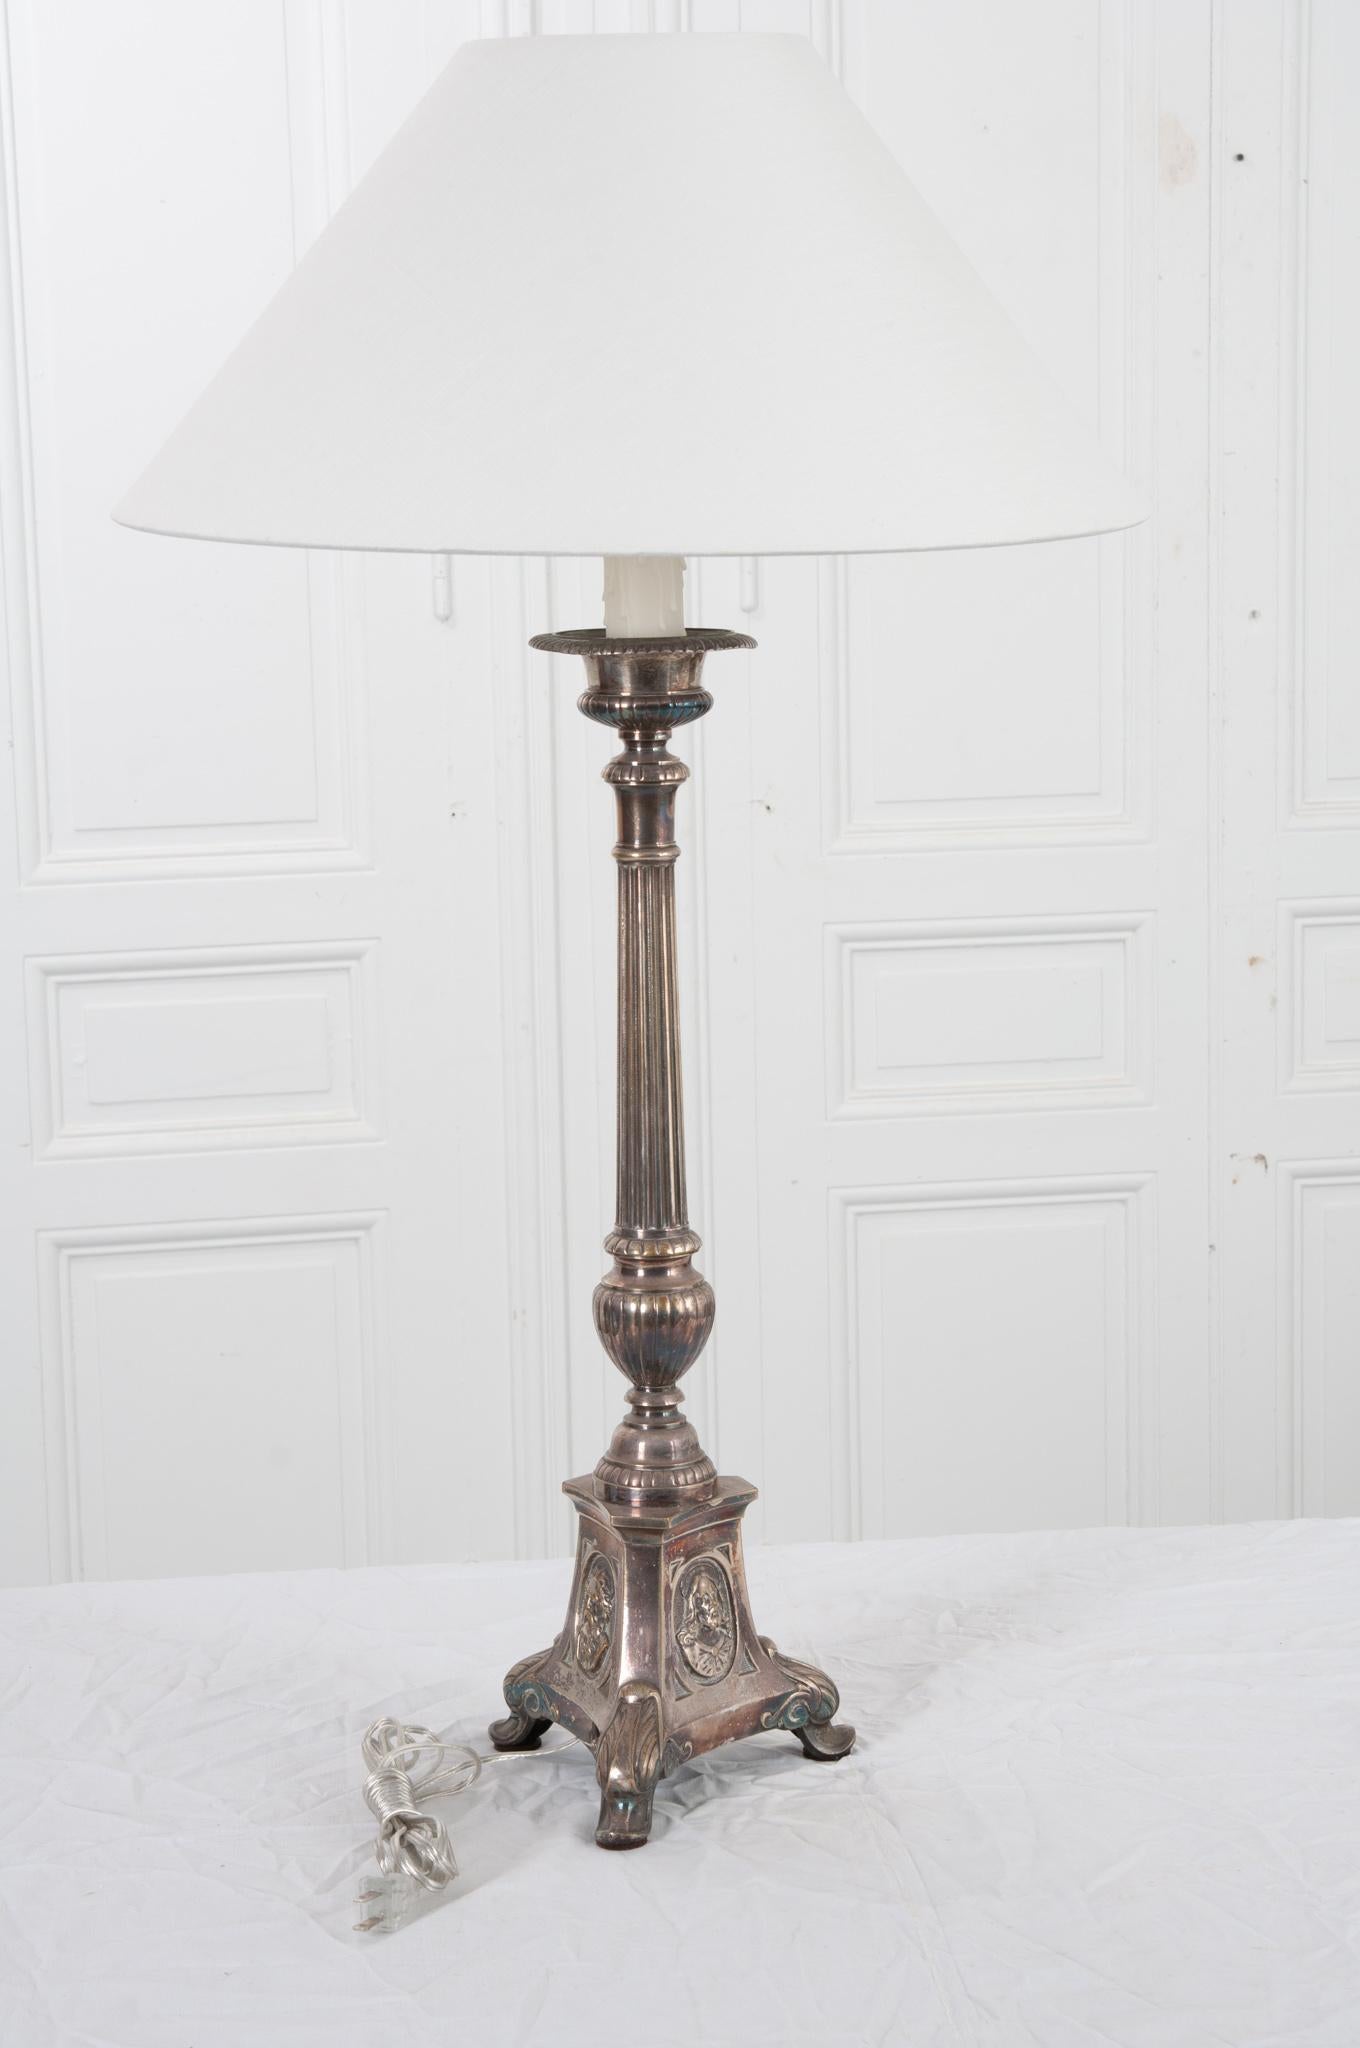 The base of this lamp is a silver plated 19th century candlestick from France. Most likely used on an altar in a Christan church, evident from the images of the Holy Trinity on the heavy tripod base. Beautiful details throughout the candlestick